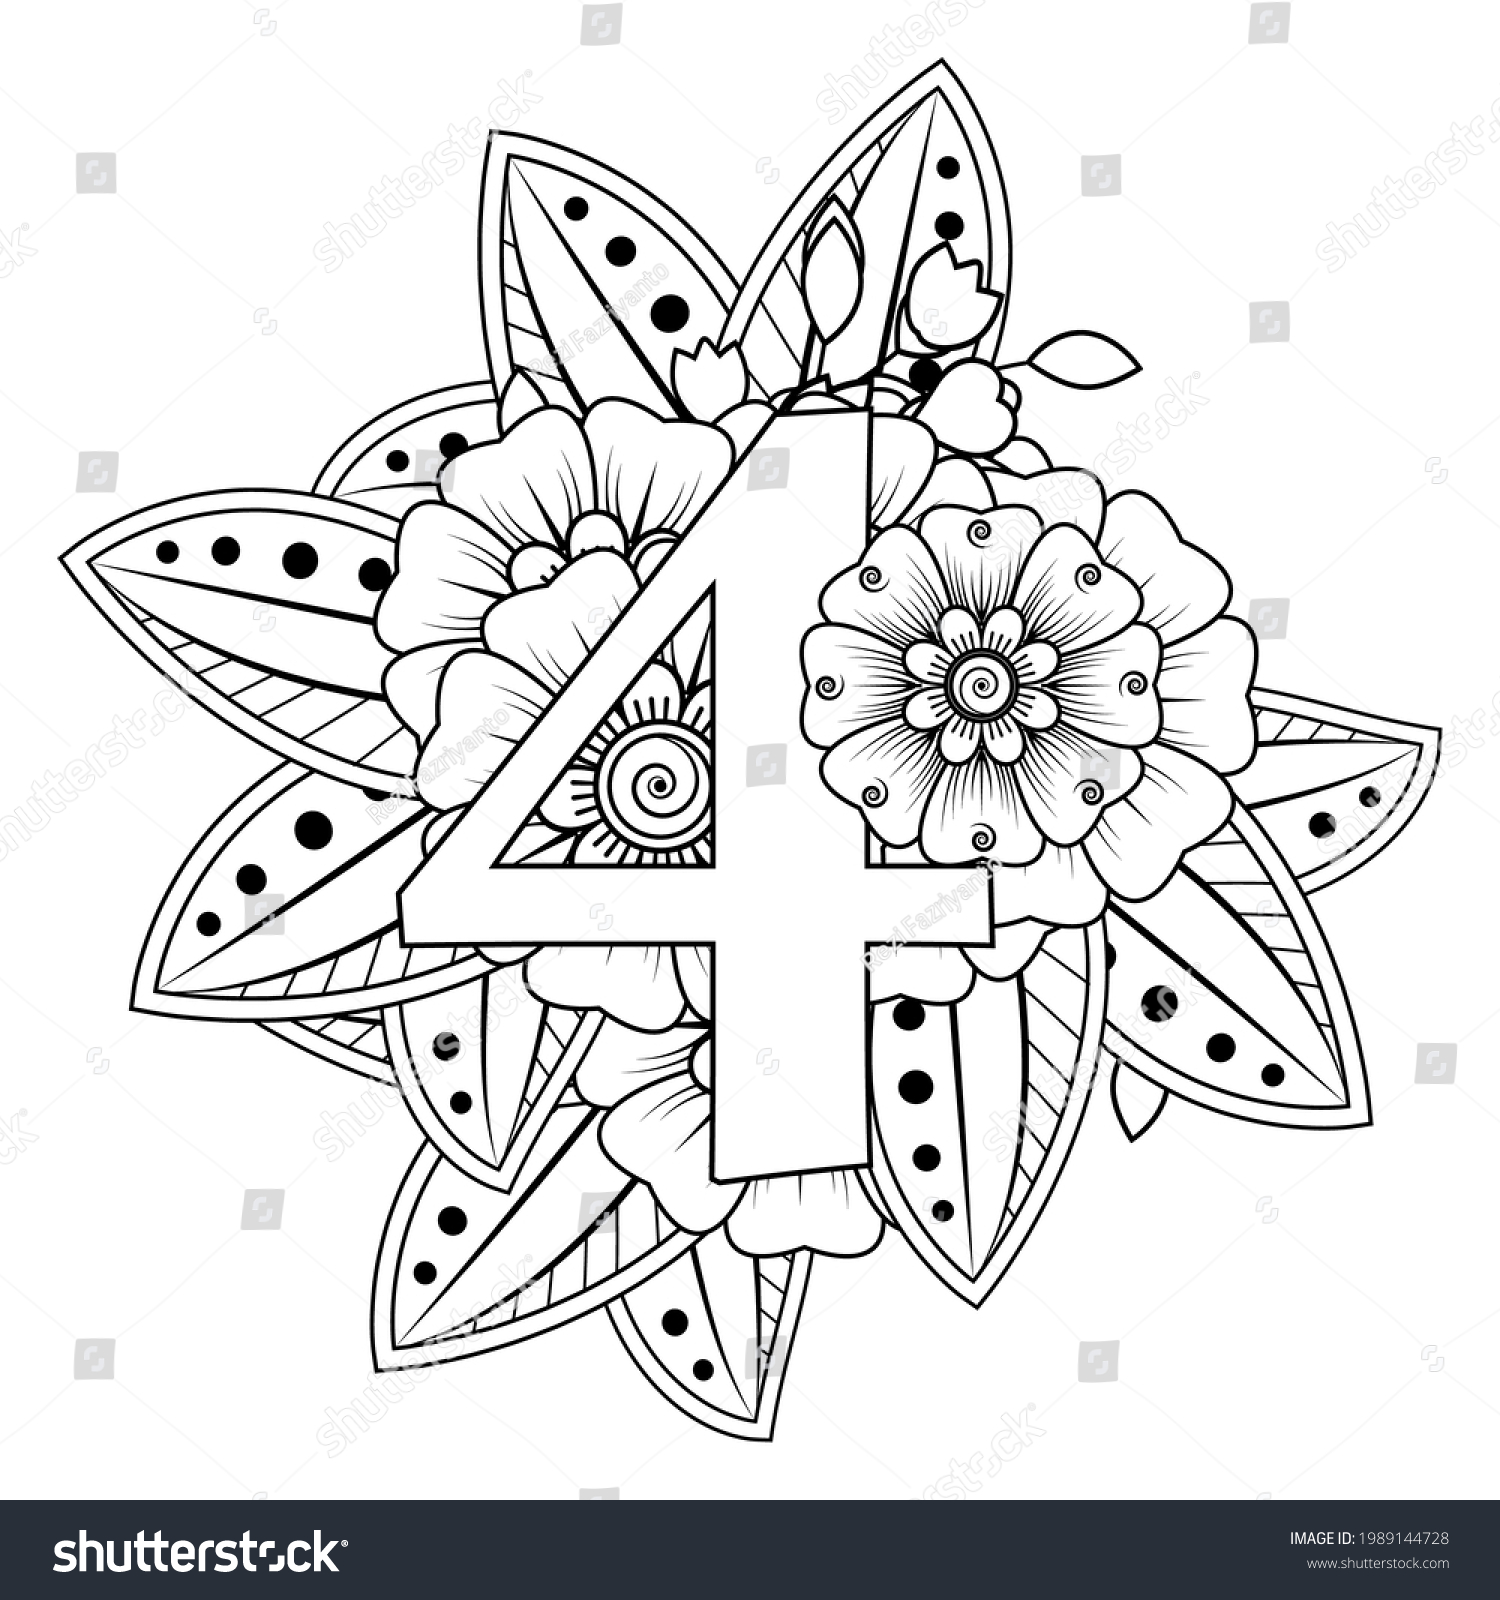 SVG of Number 4 with Mehndi flower. decorative ornament in ethnic oriental style. coloring book page.  svg